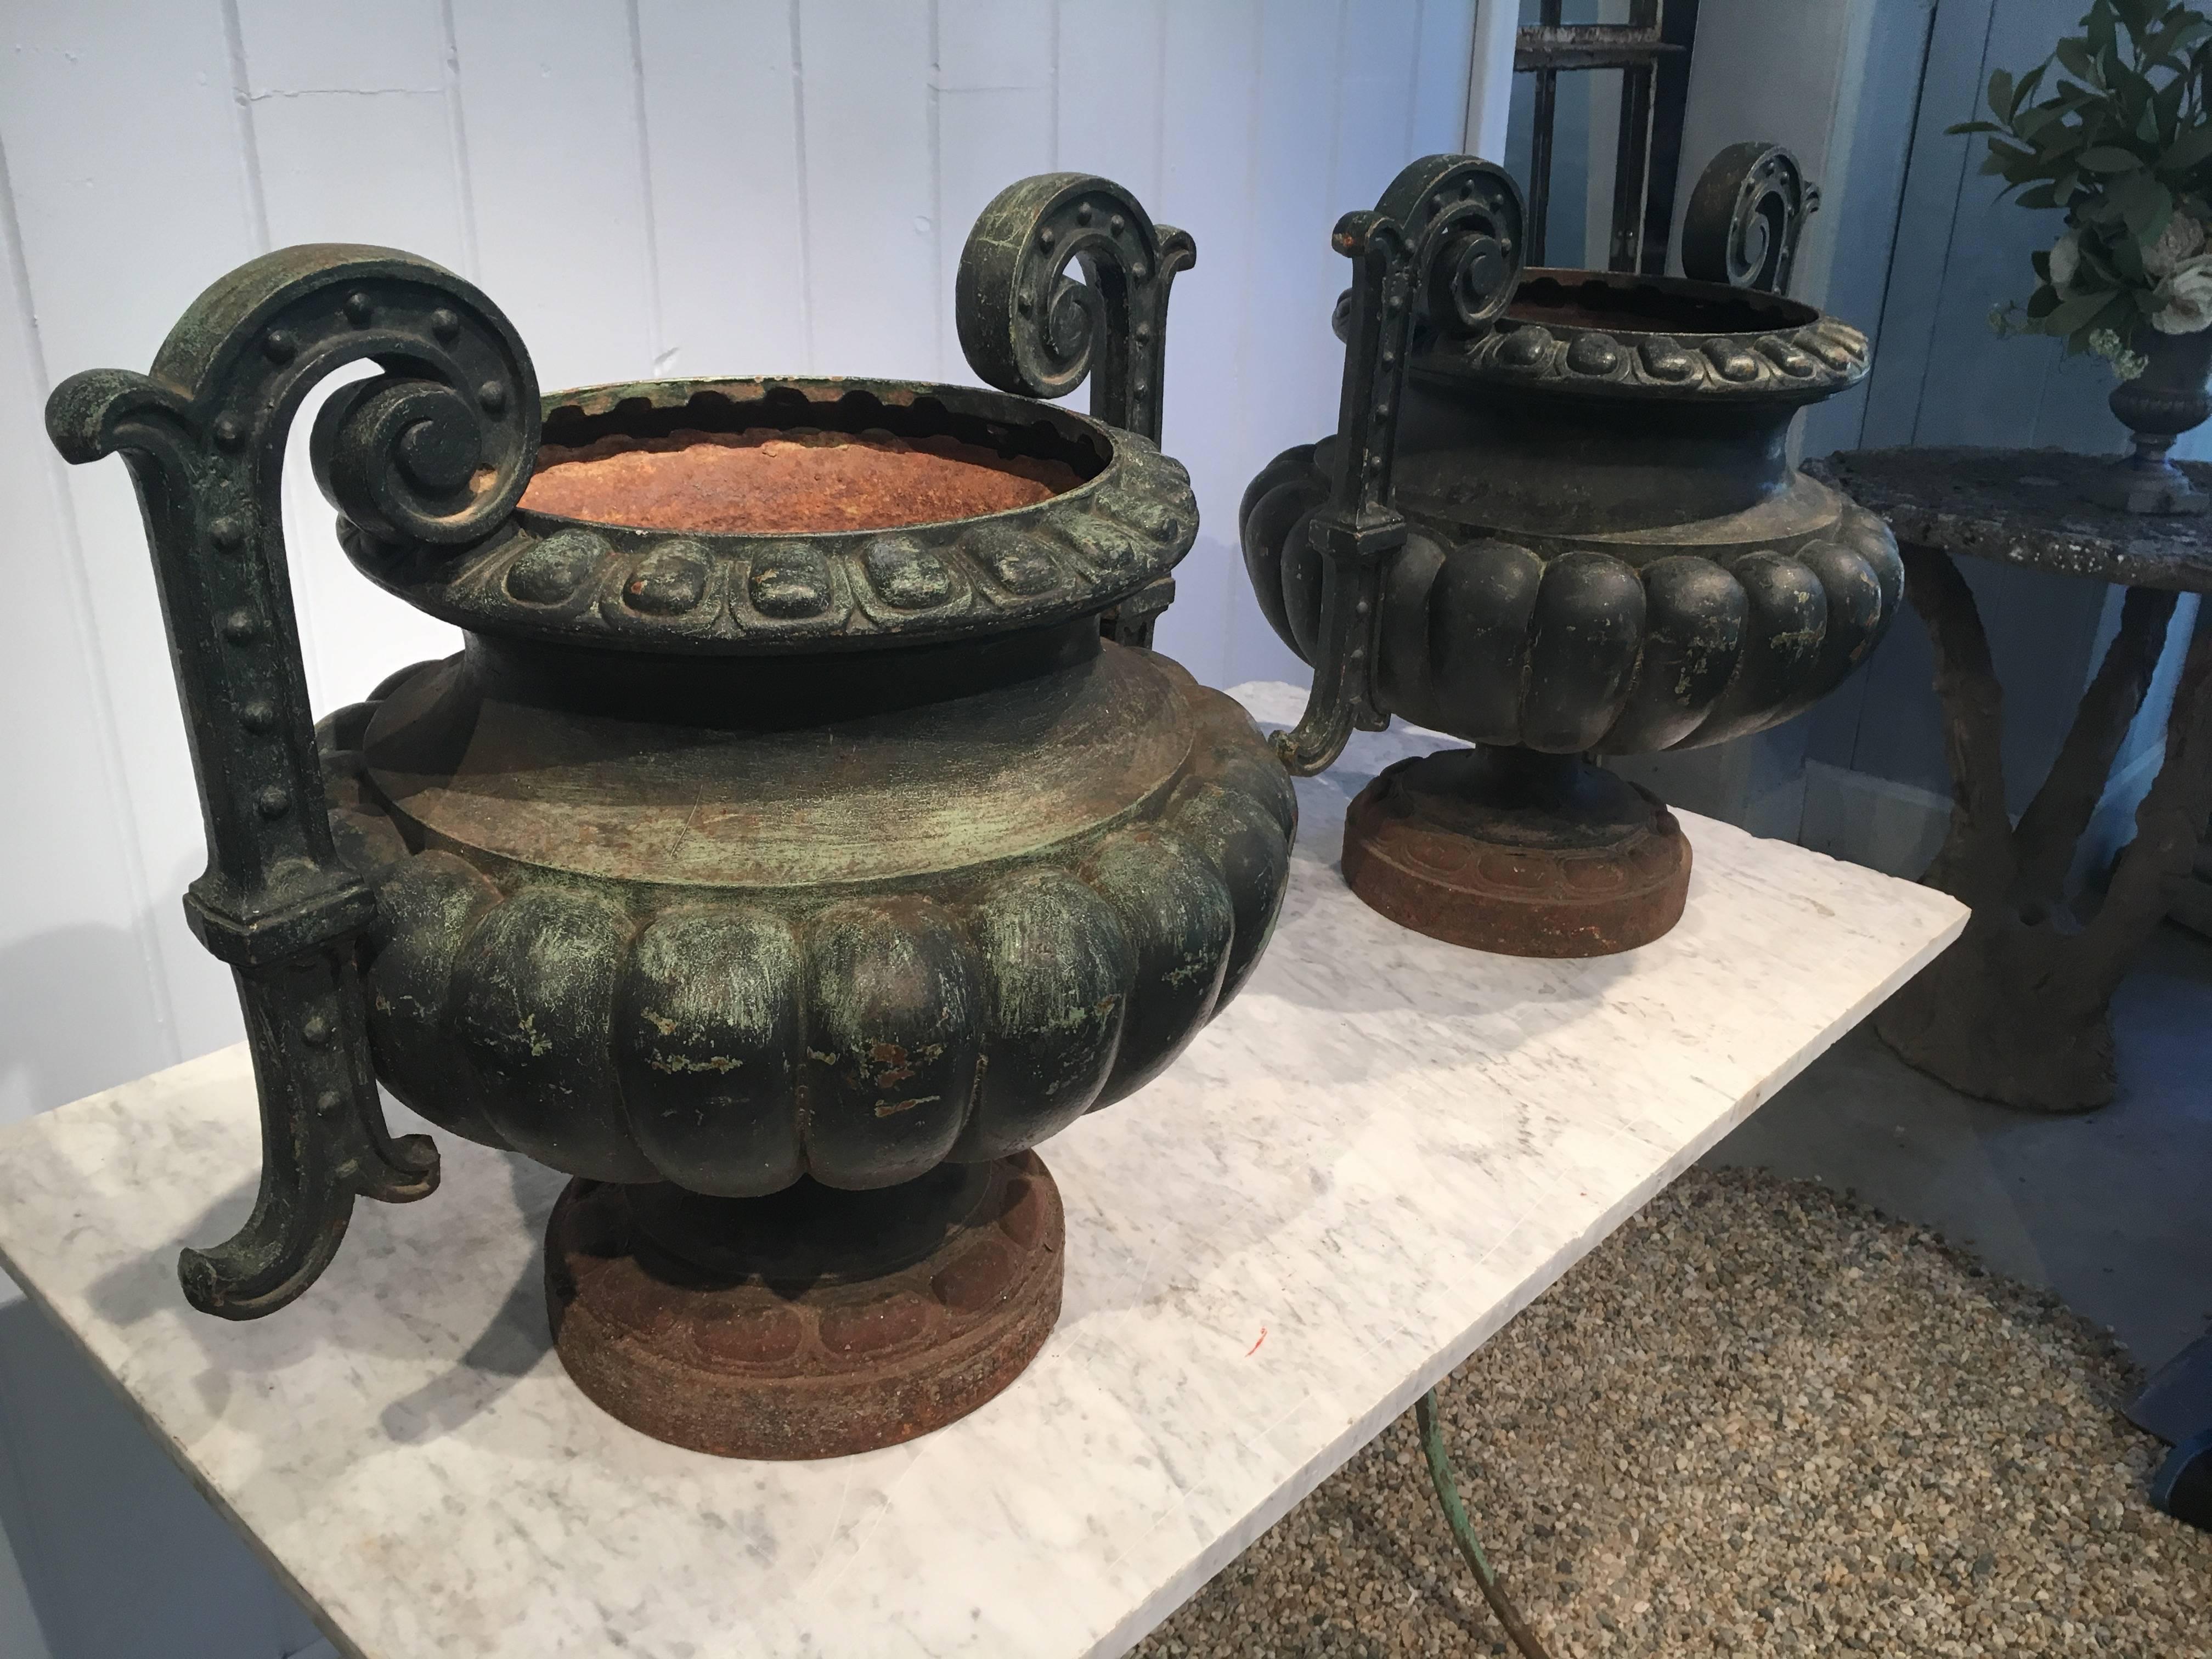 We love the classical melon form of these urns, embellished with scrolled handles and perfectly proportioned. Each sports old dark green paint and they are signed on their feet by their maker, Alfred Corneau and Sons. In wonderful condition, they